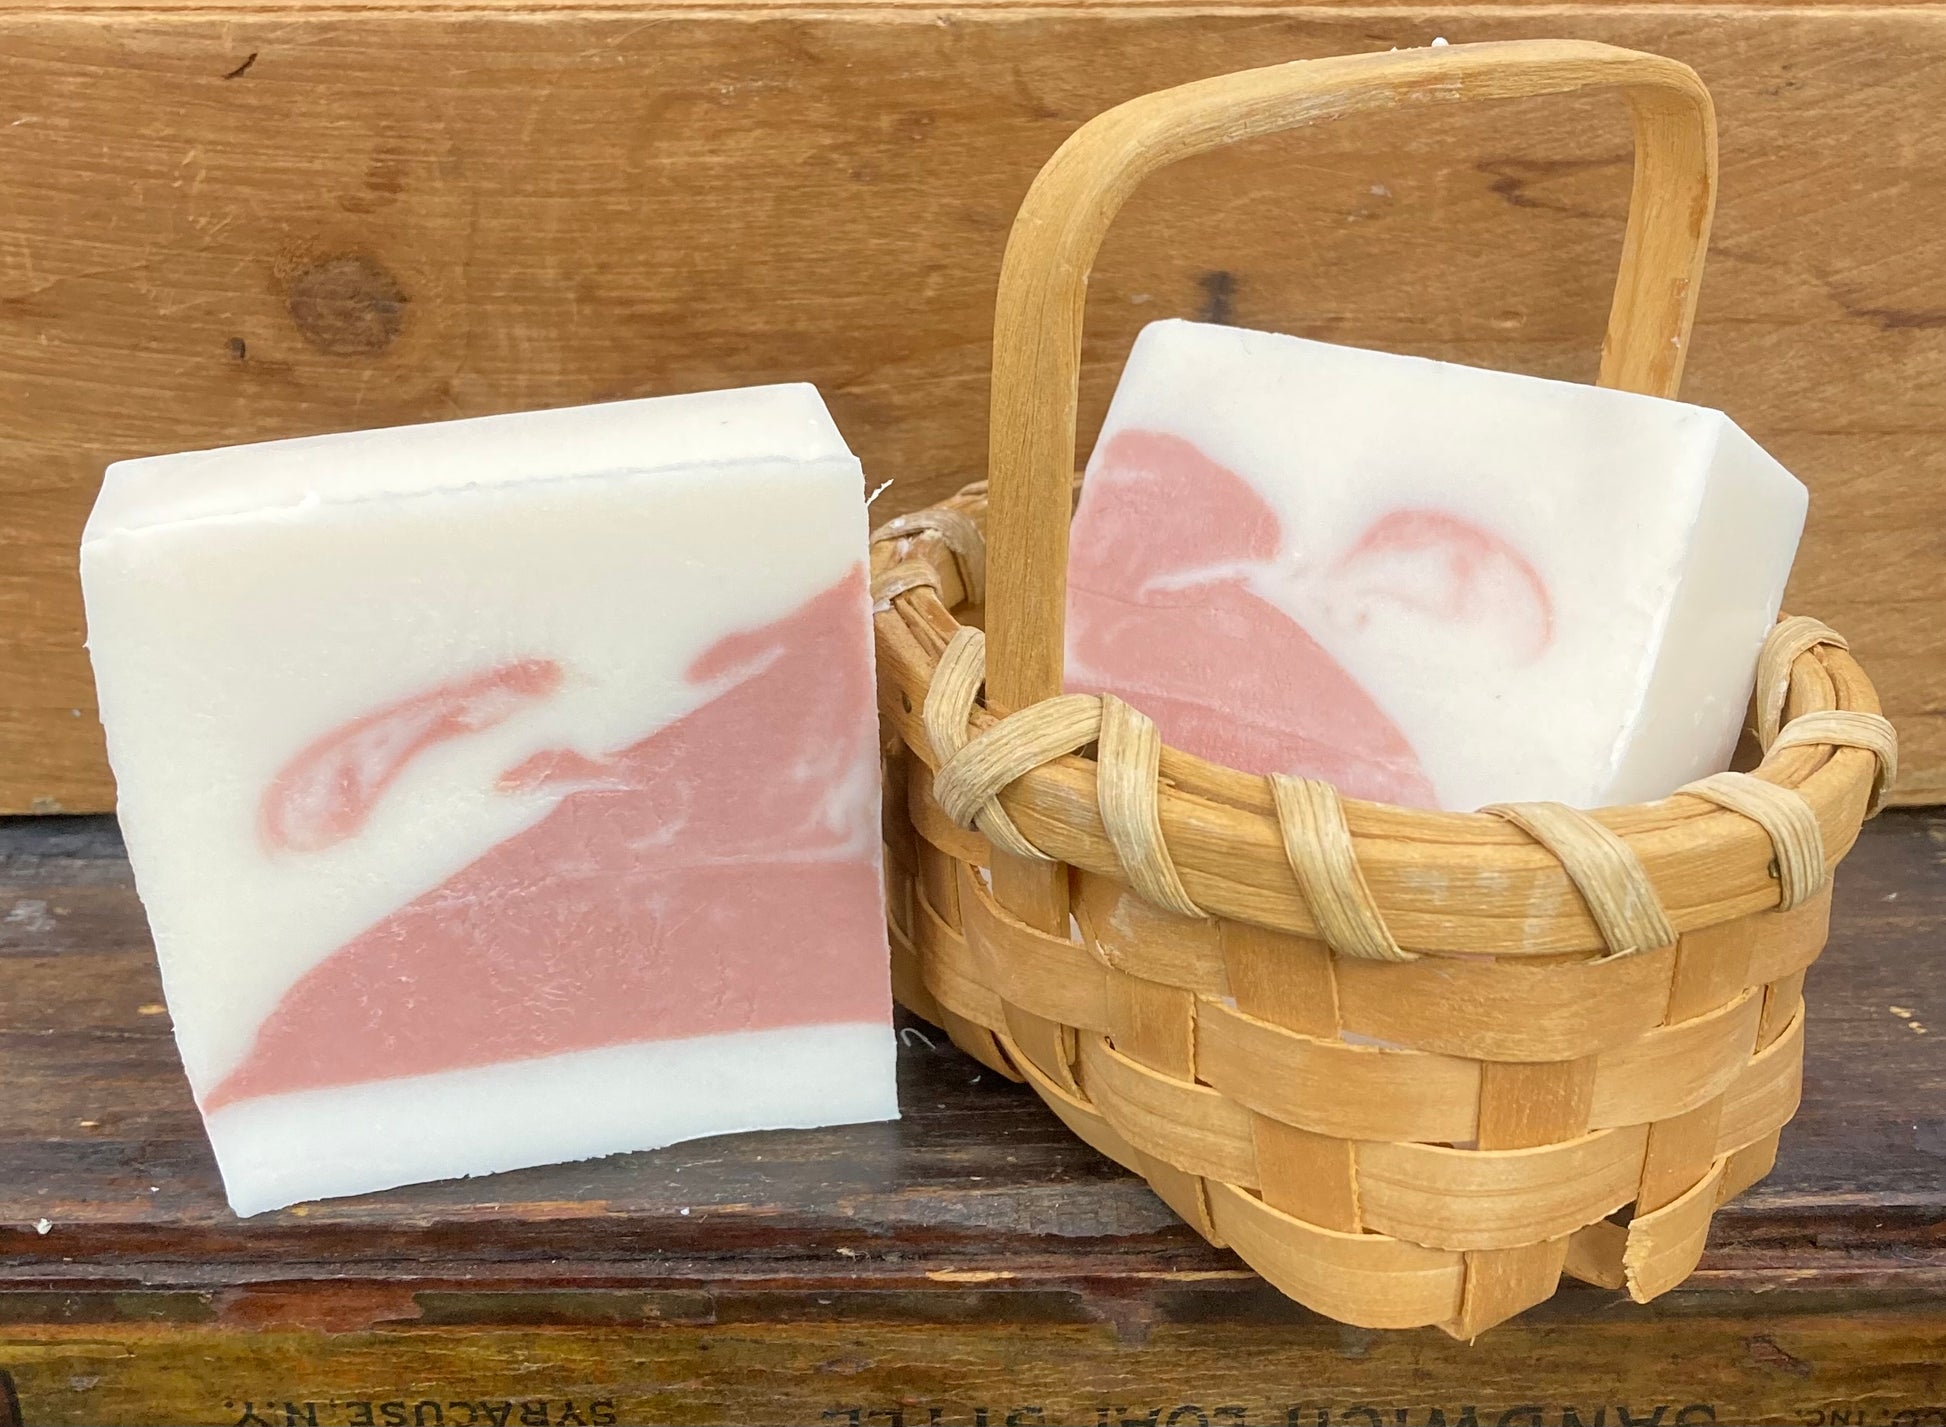  This is a 4 oz bar of Patchouli scented Goats Milk Soap.  You have requested it, so here it is! This is a classic scent in a moisturizing bar of soap.  It makes bathtime a spa-like experience!